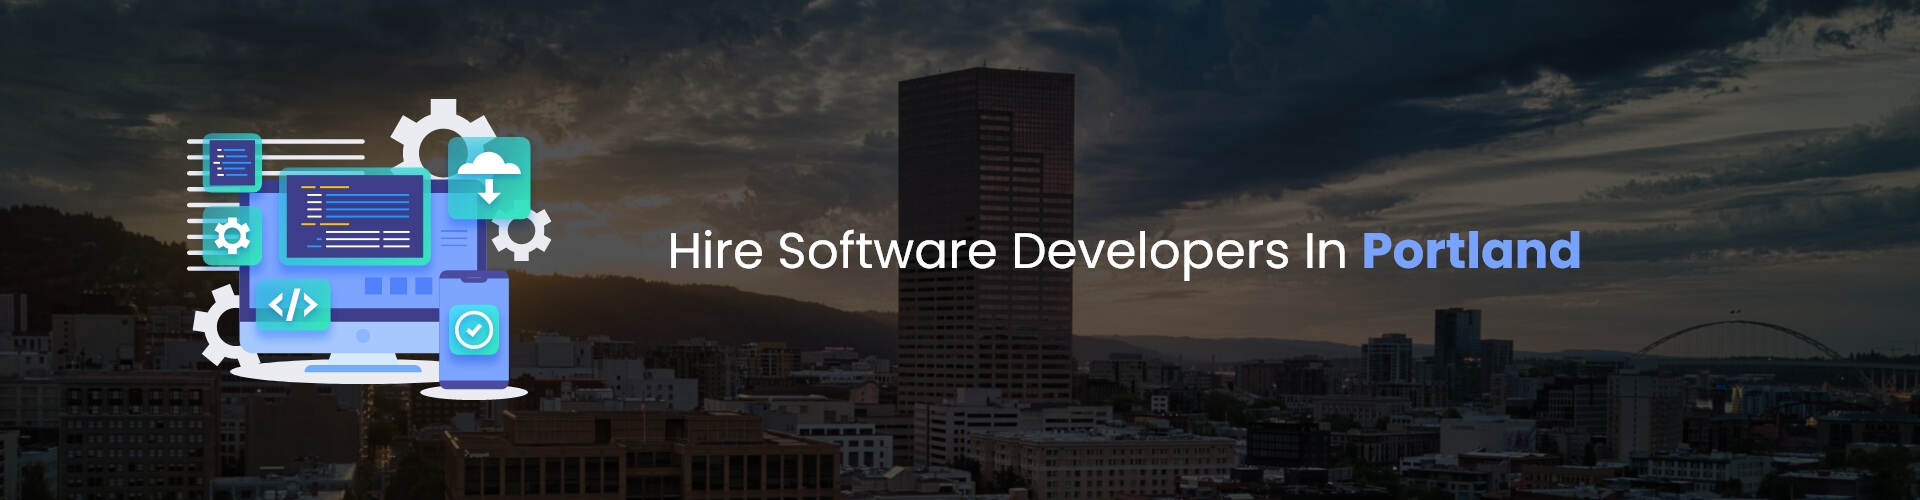 hire software developers in portland